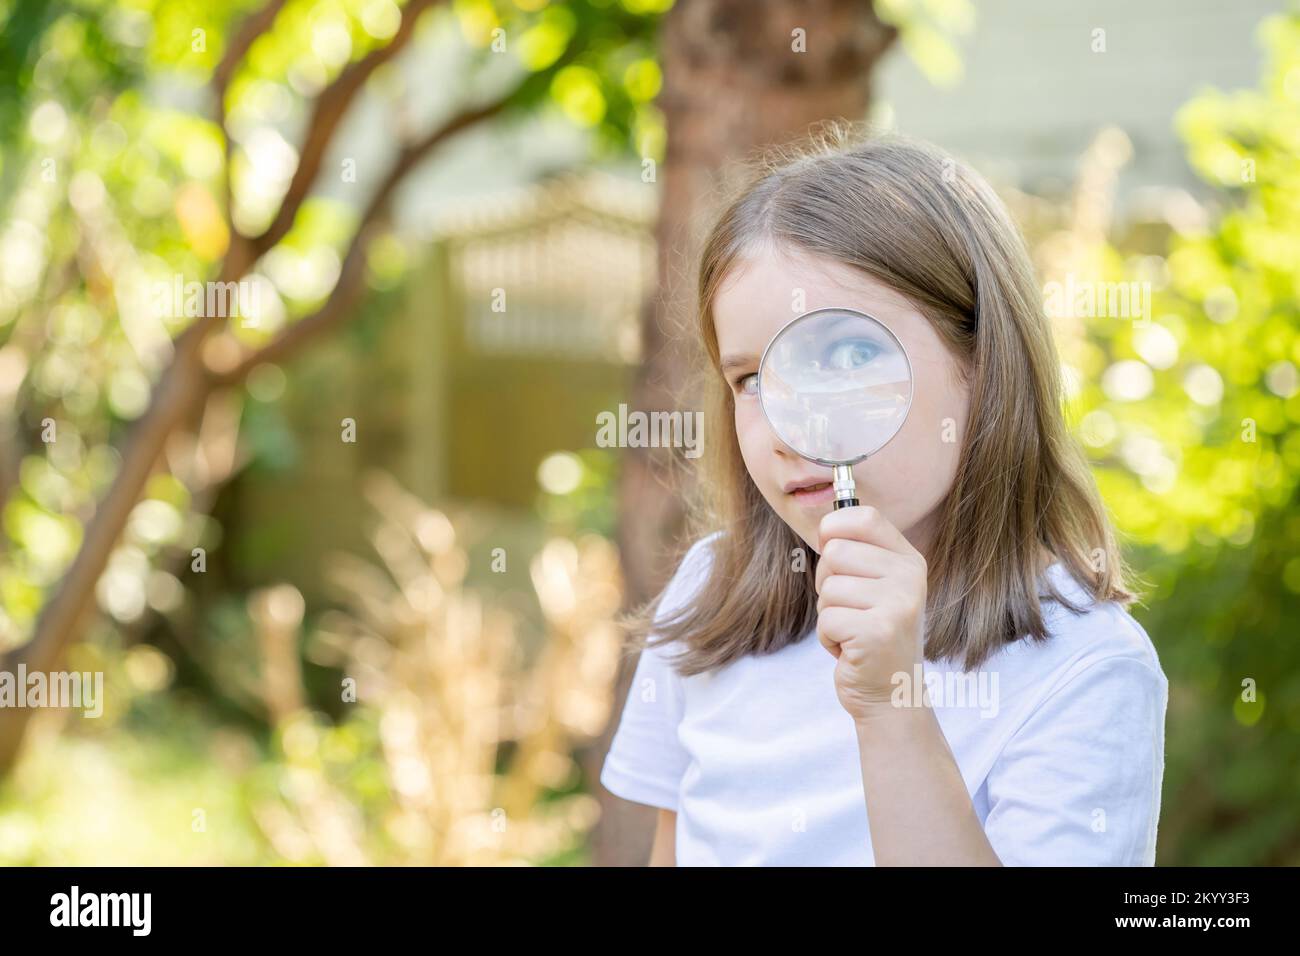 Curious clever elementary school age child, girl looking at the camera through a magnifying glass, holding a loupe in hand, one eye closed, one visibl Stock Photo